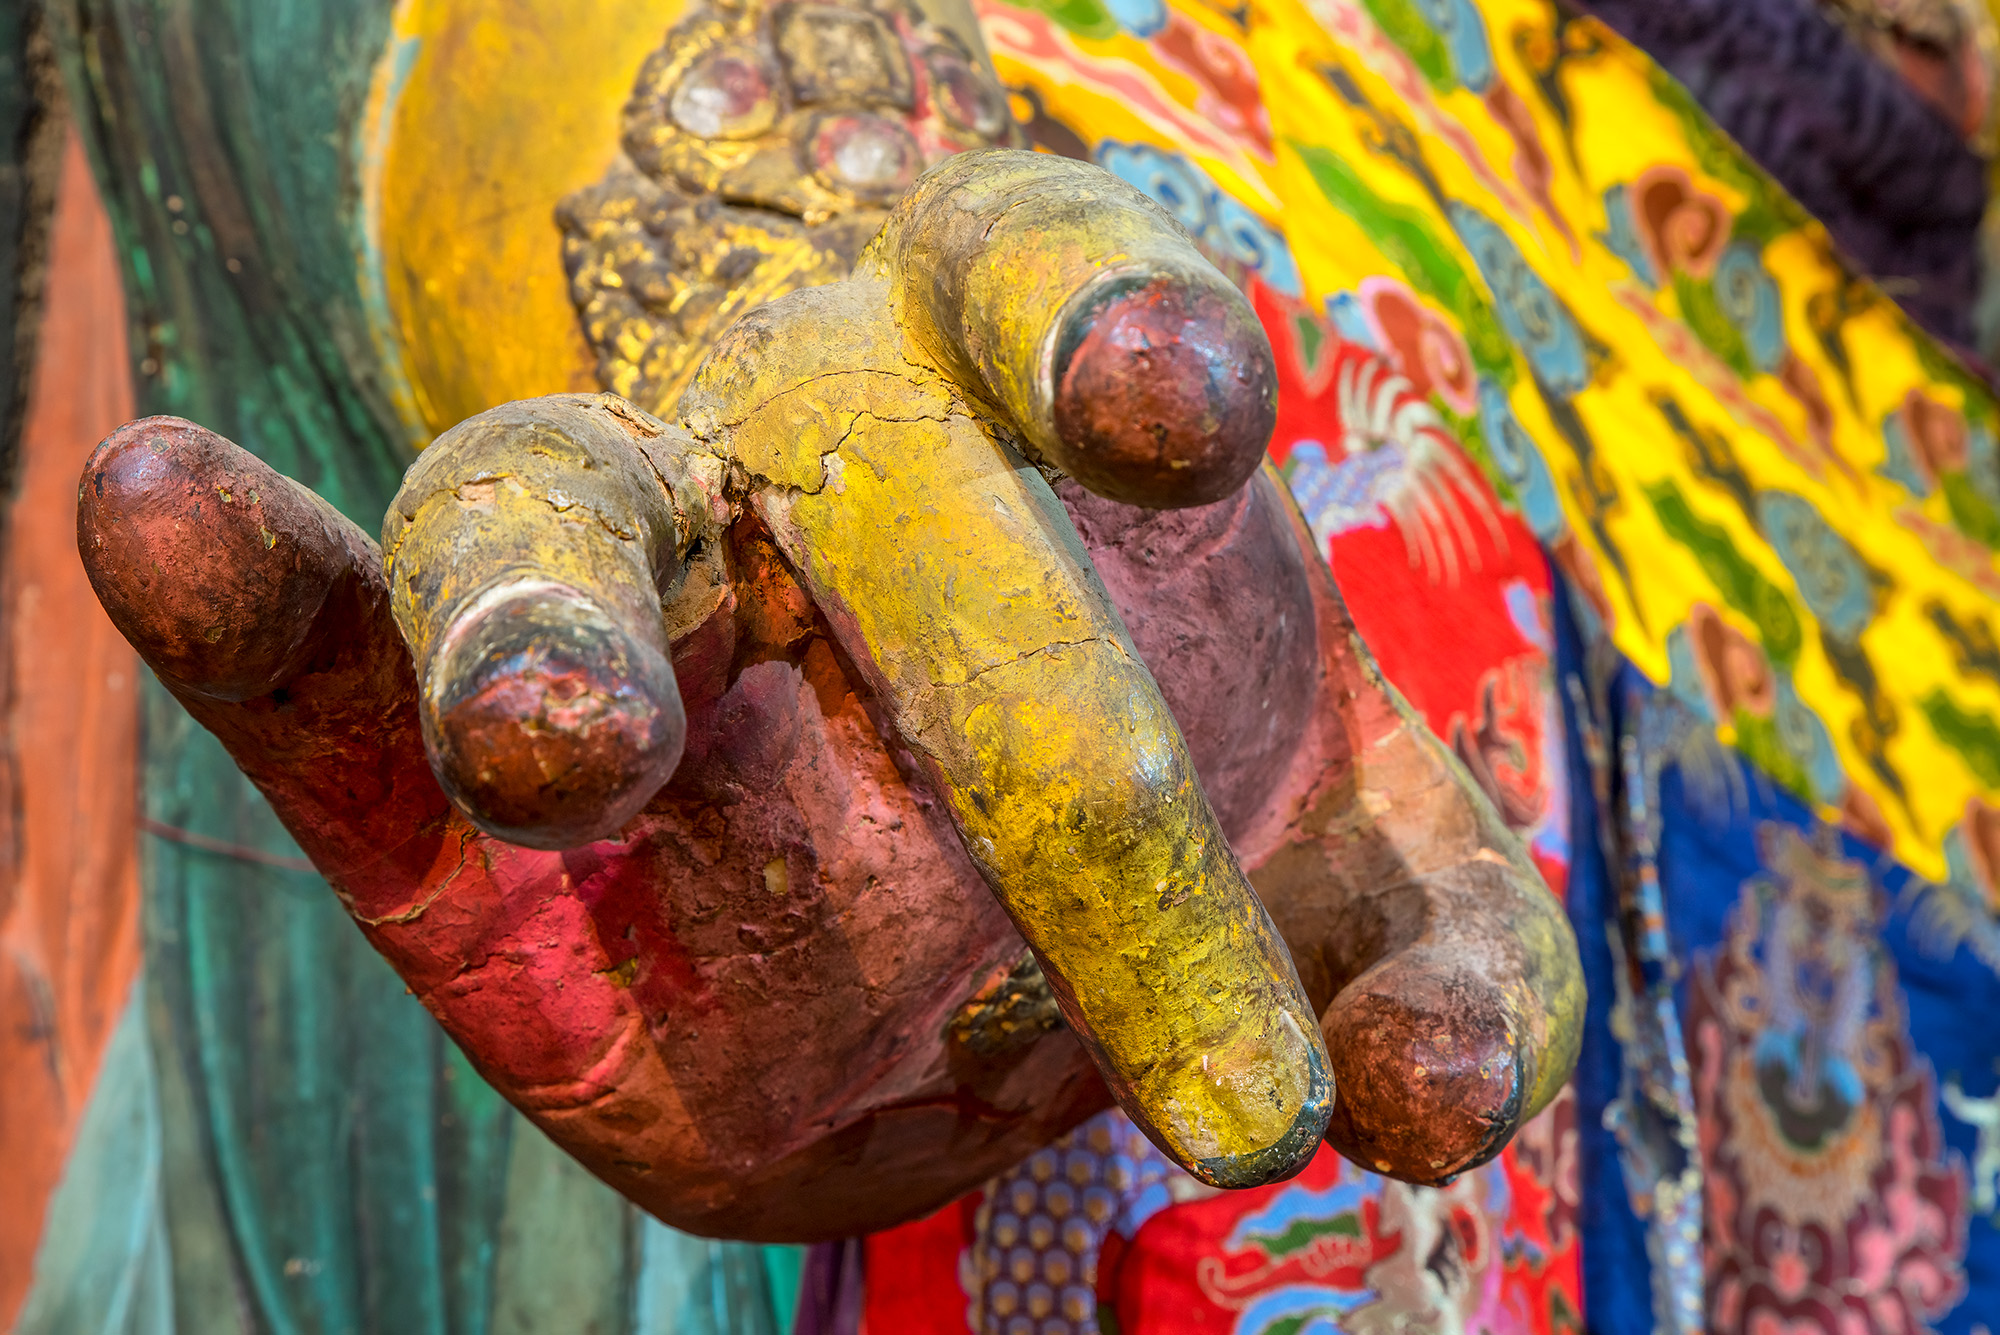 "Buddha's Multicolored Mudra" offers a close-up view of a hand from one of the vibrant, multi-colored Buddhist statues found...